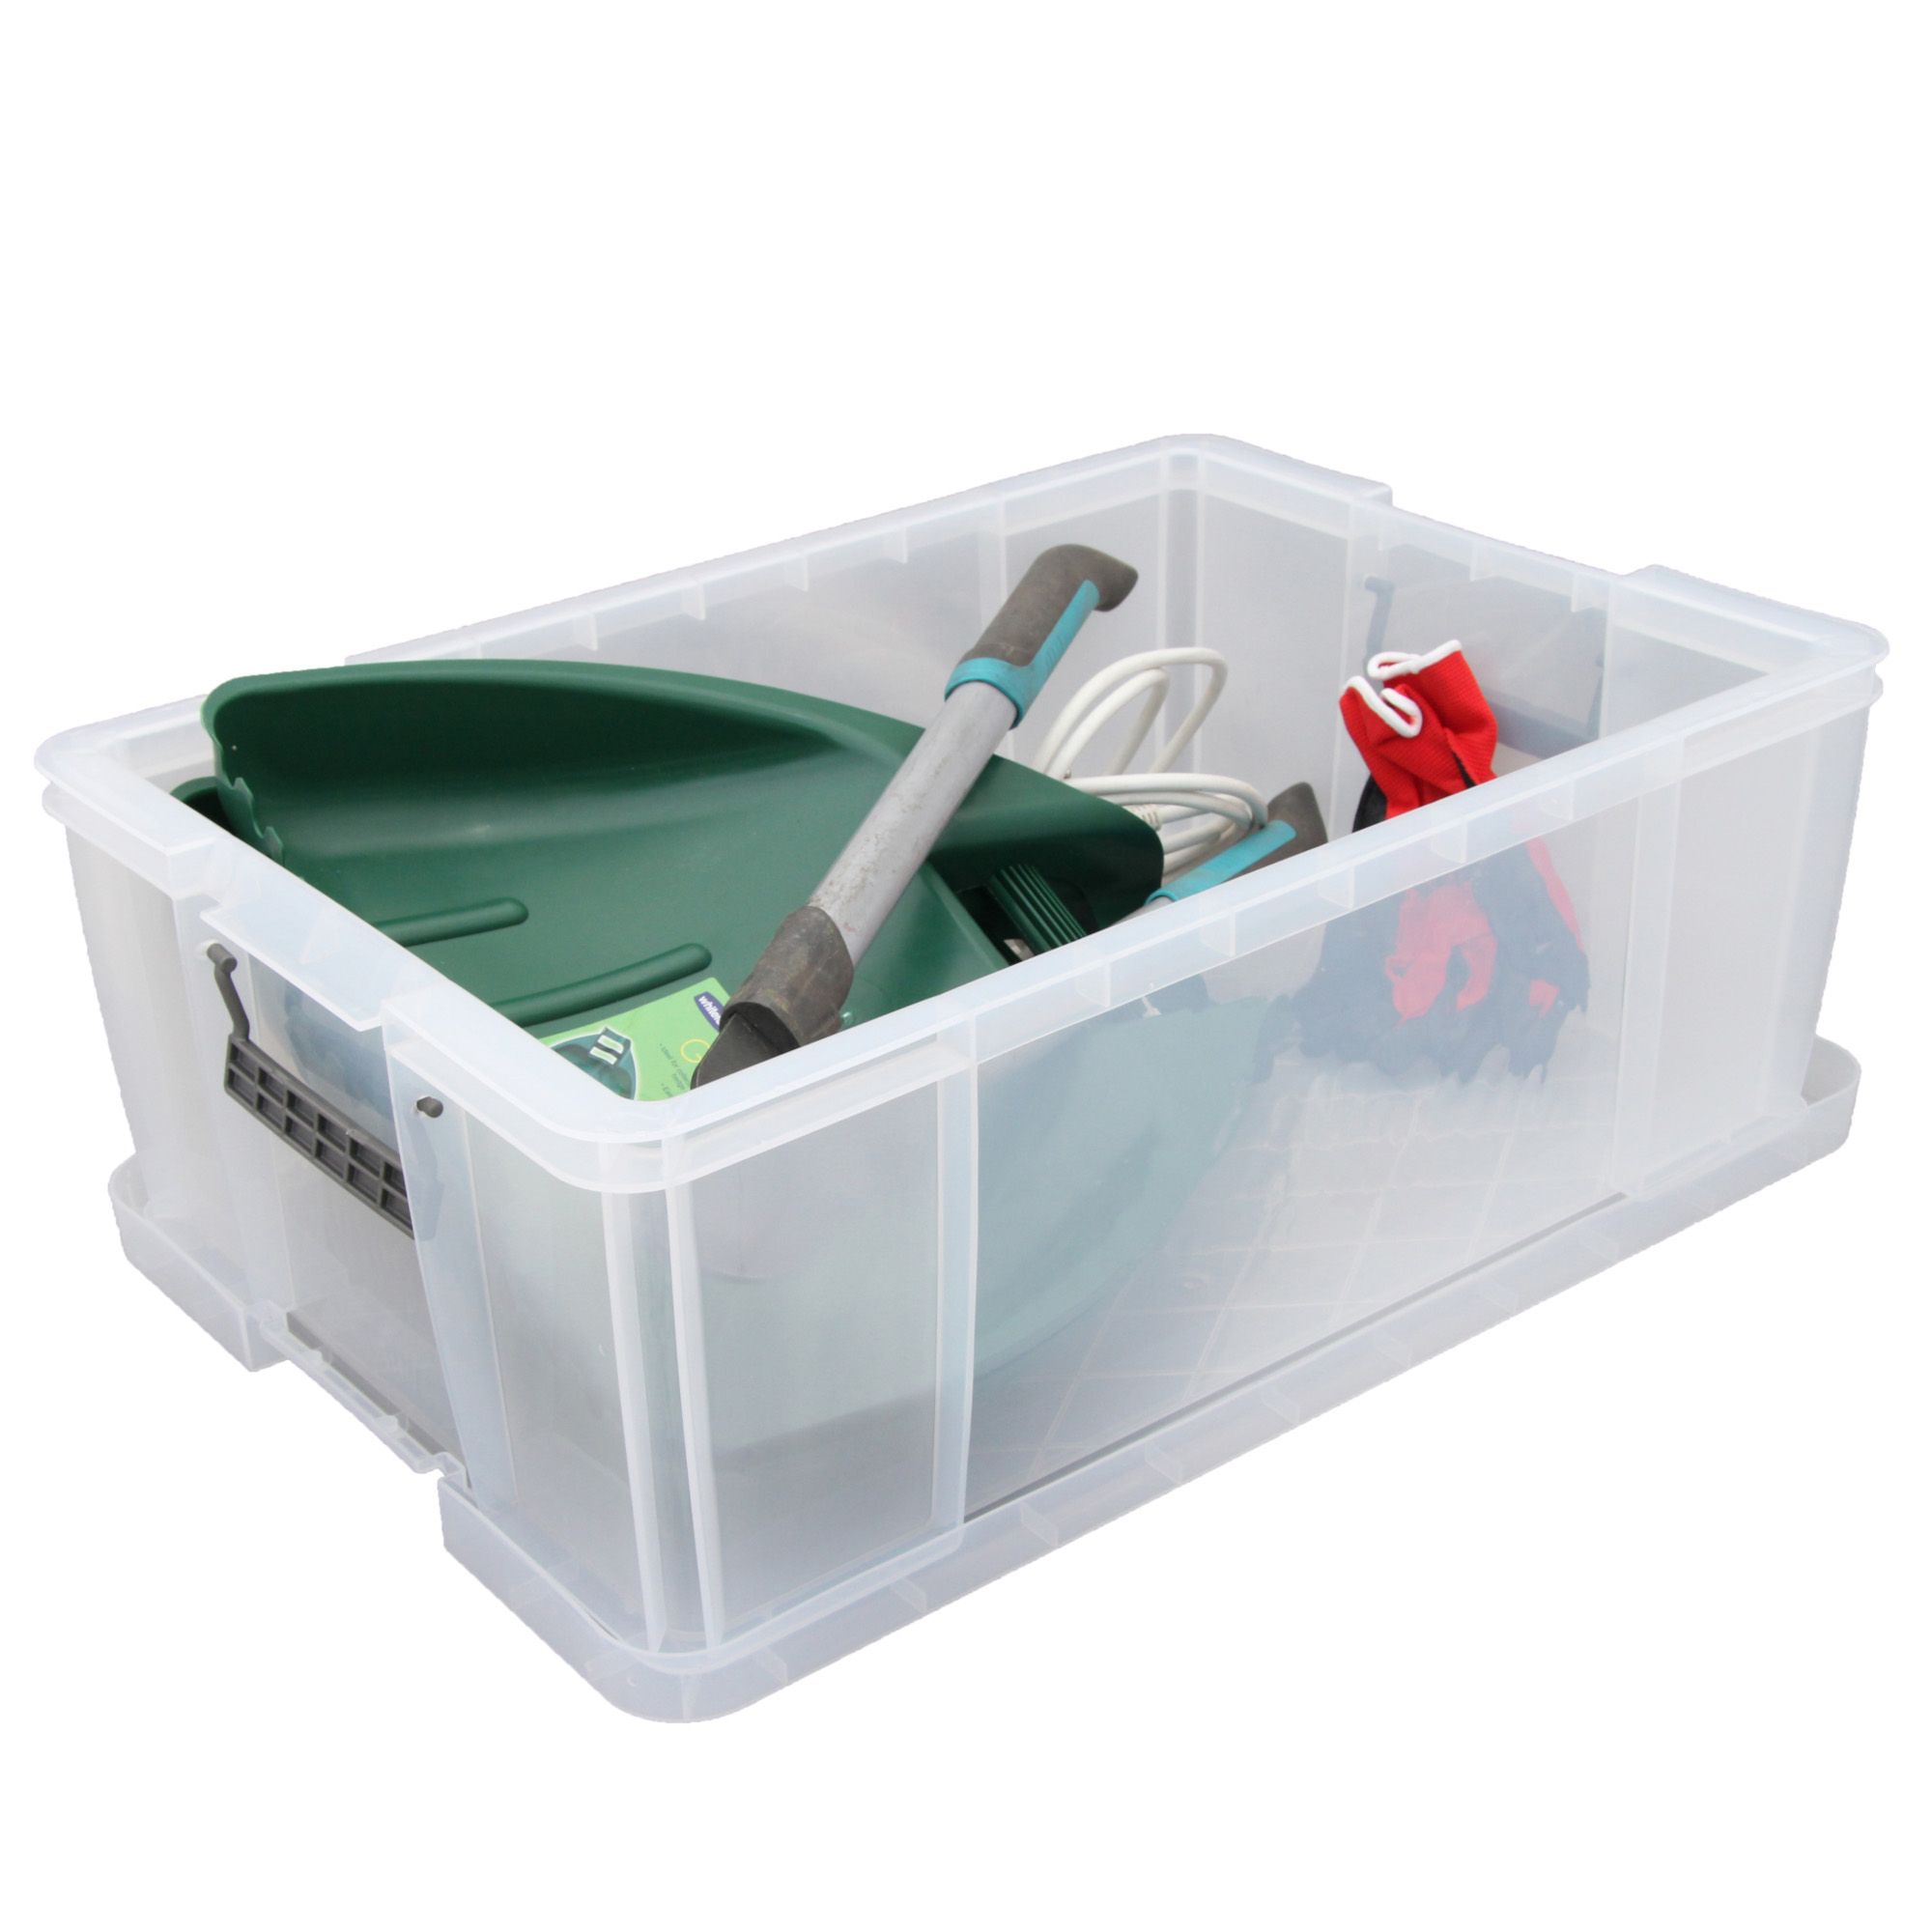 Whitefurze Allstore Heavy duty Clear 51L Plastic Stackable Storage box with Lid